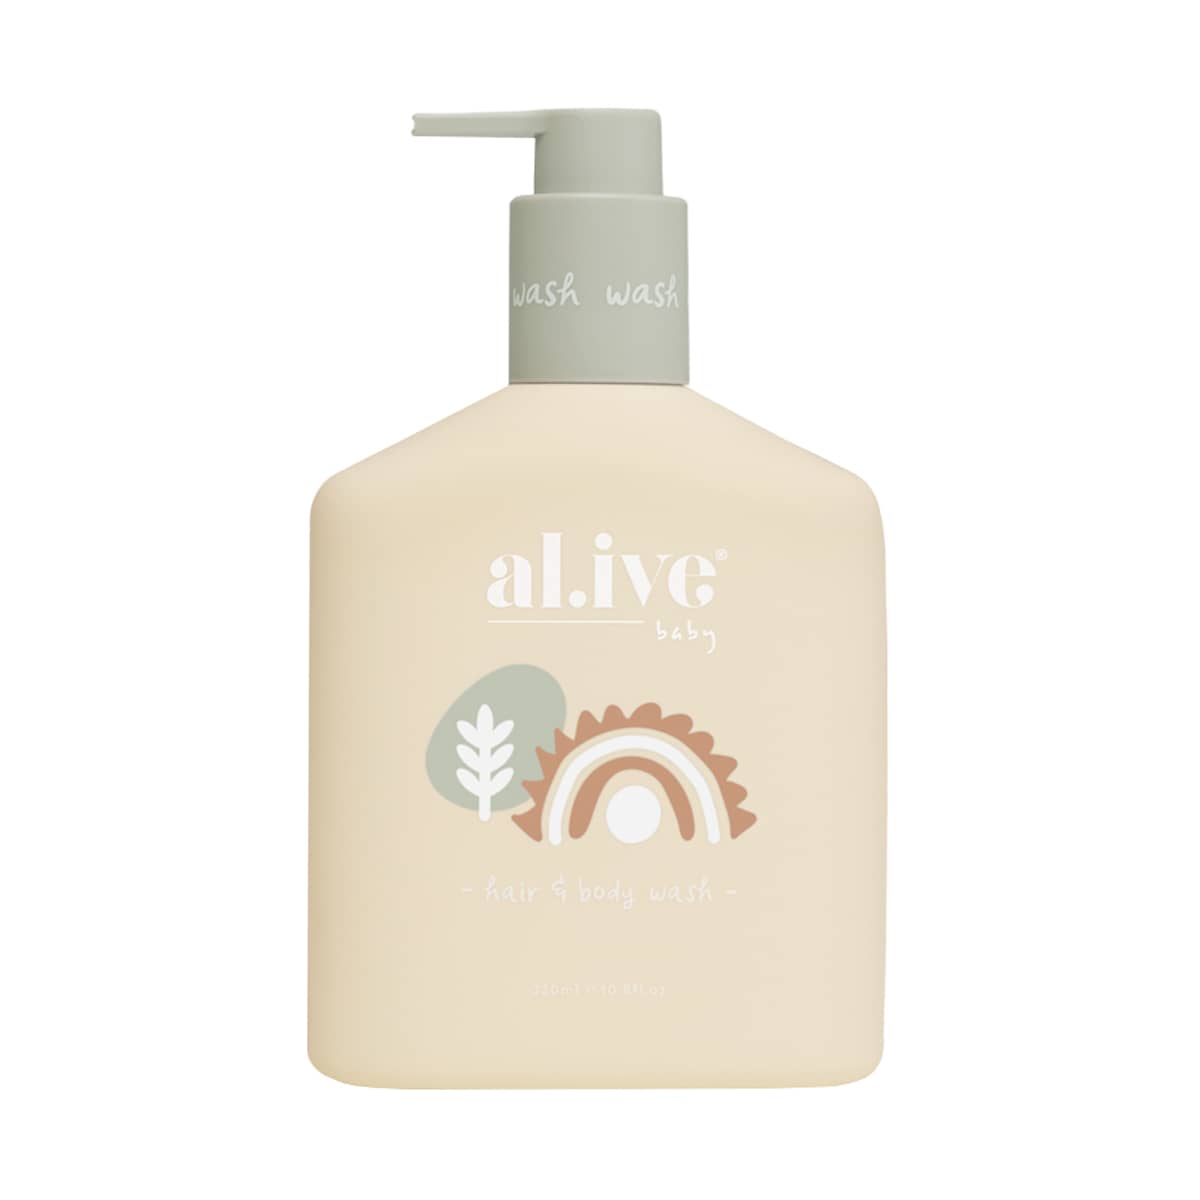 al.ive body Baby Hair and Body Wash - Gentle Pear - New Design